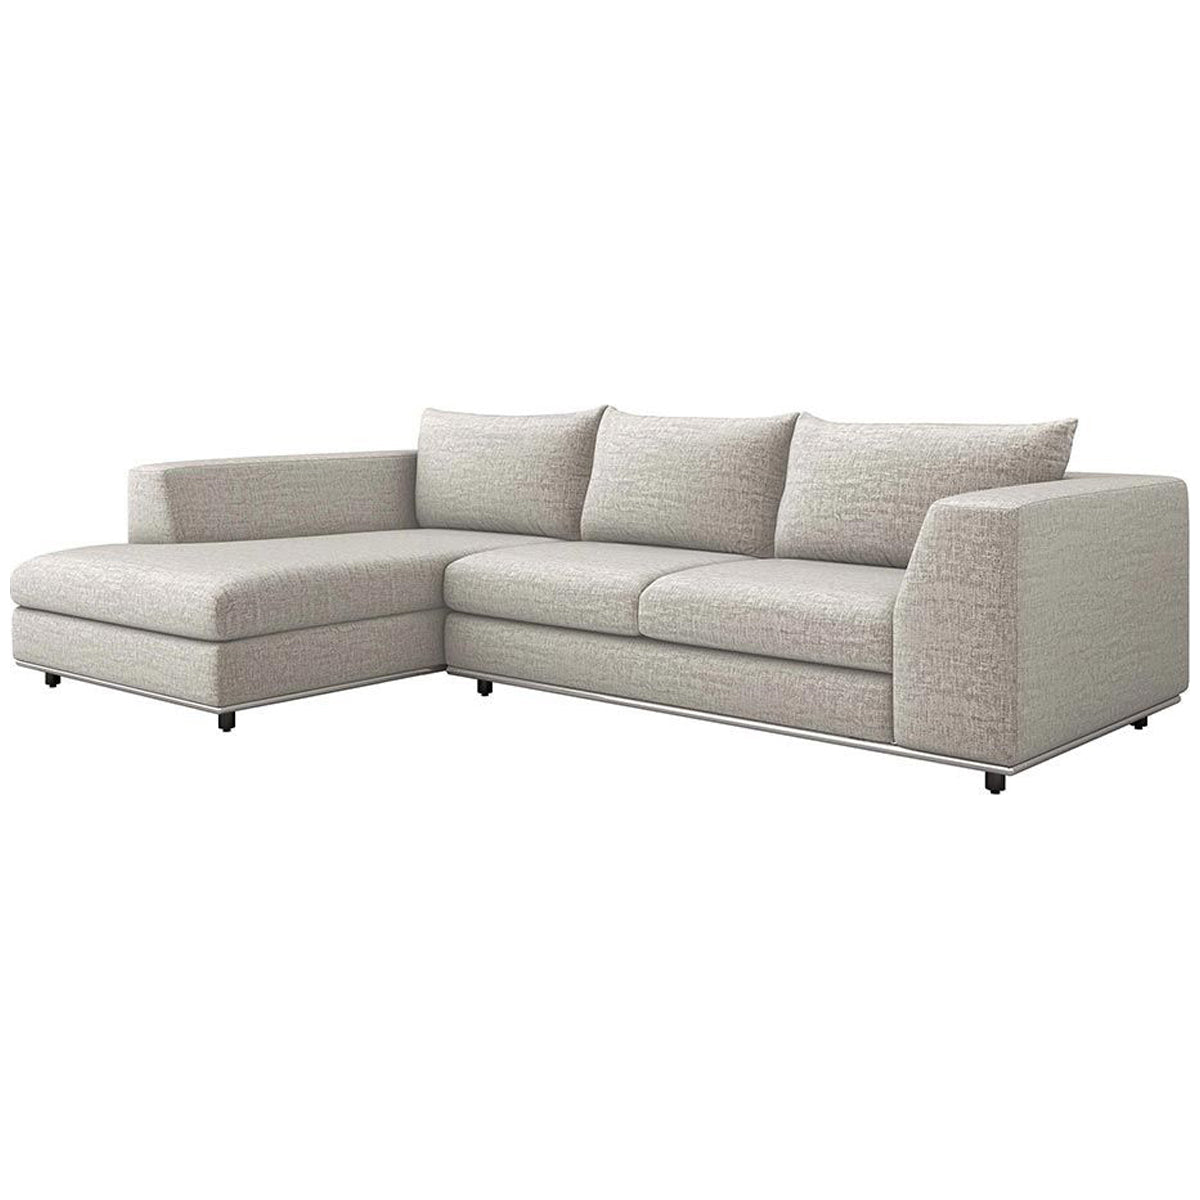 Interlude Home Comodo Chaise 2-Piece Sectional - Storm